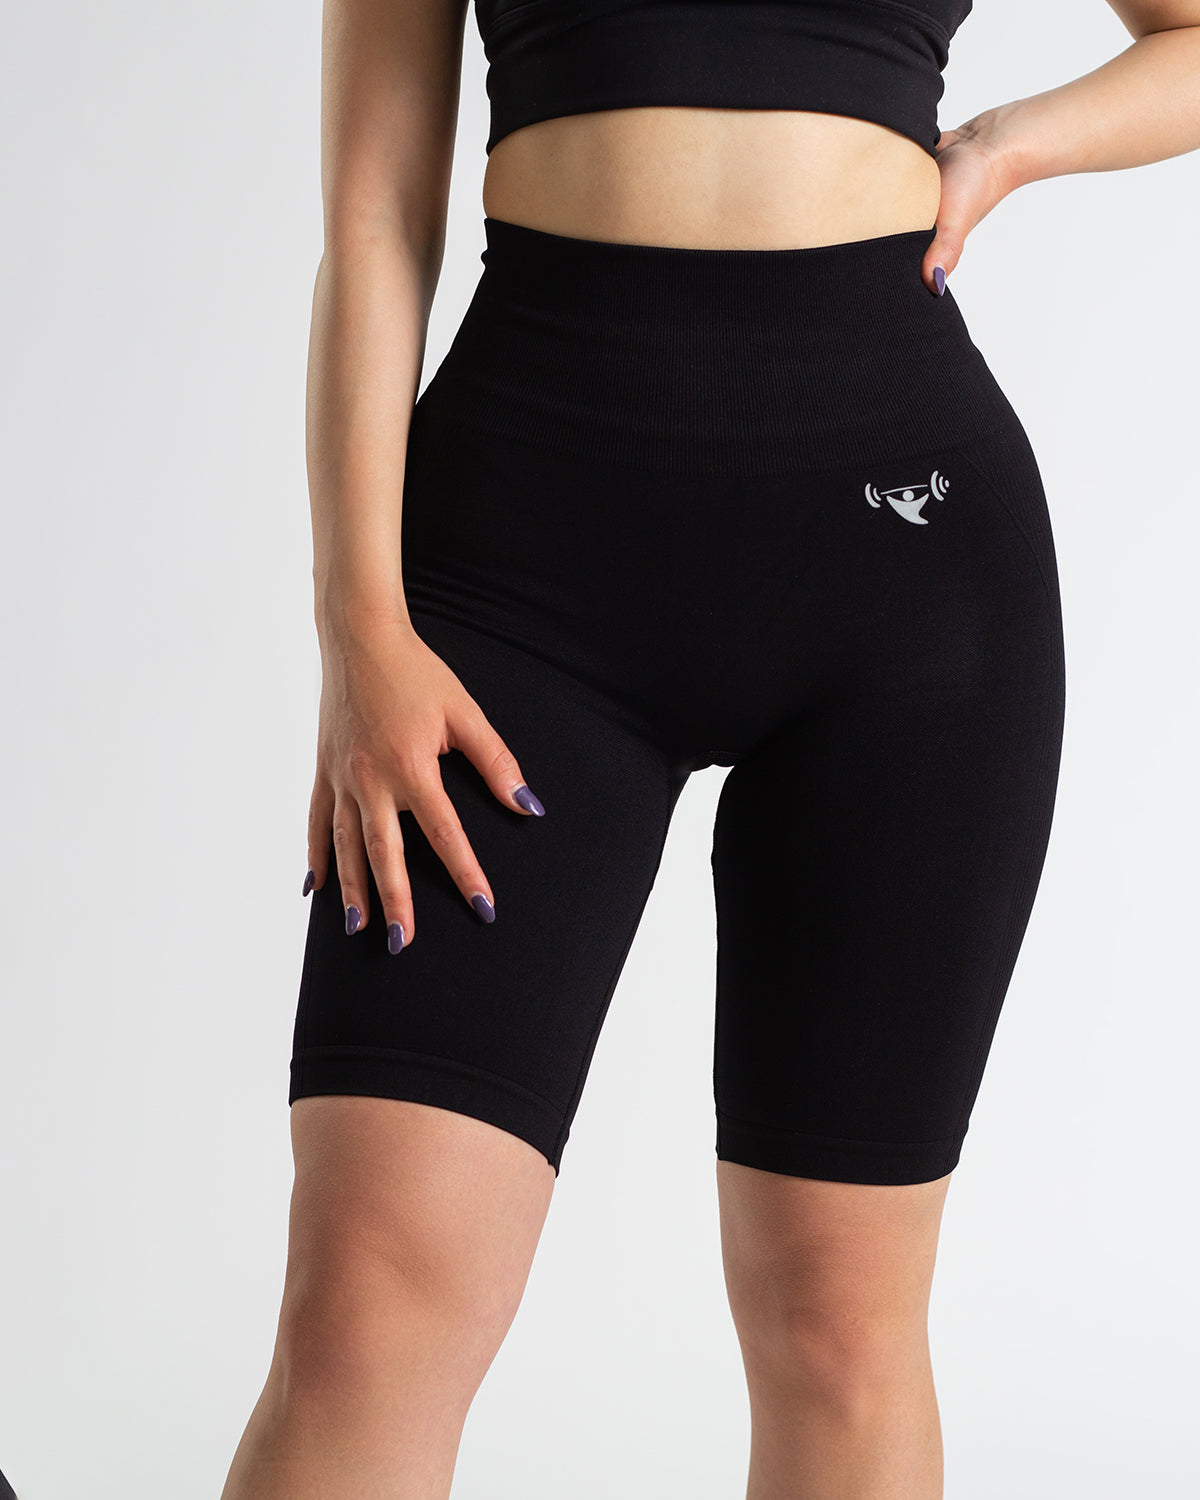 High Waist Sports Leggings with Contouring Design in Black – Chi Chi London